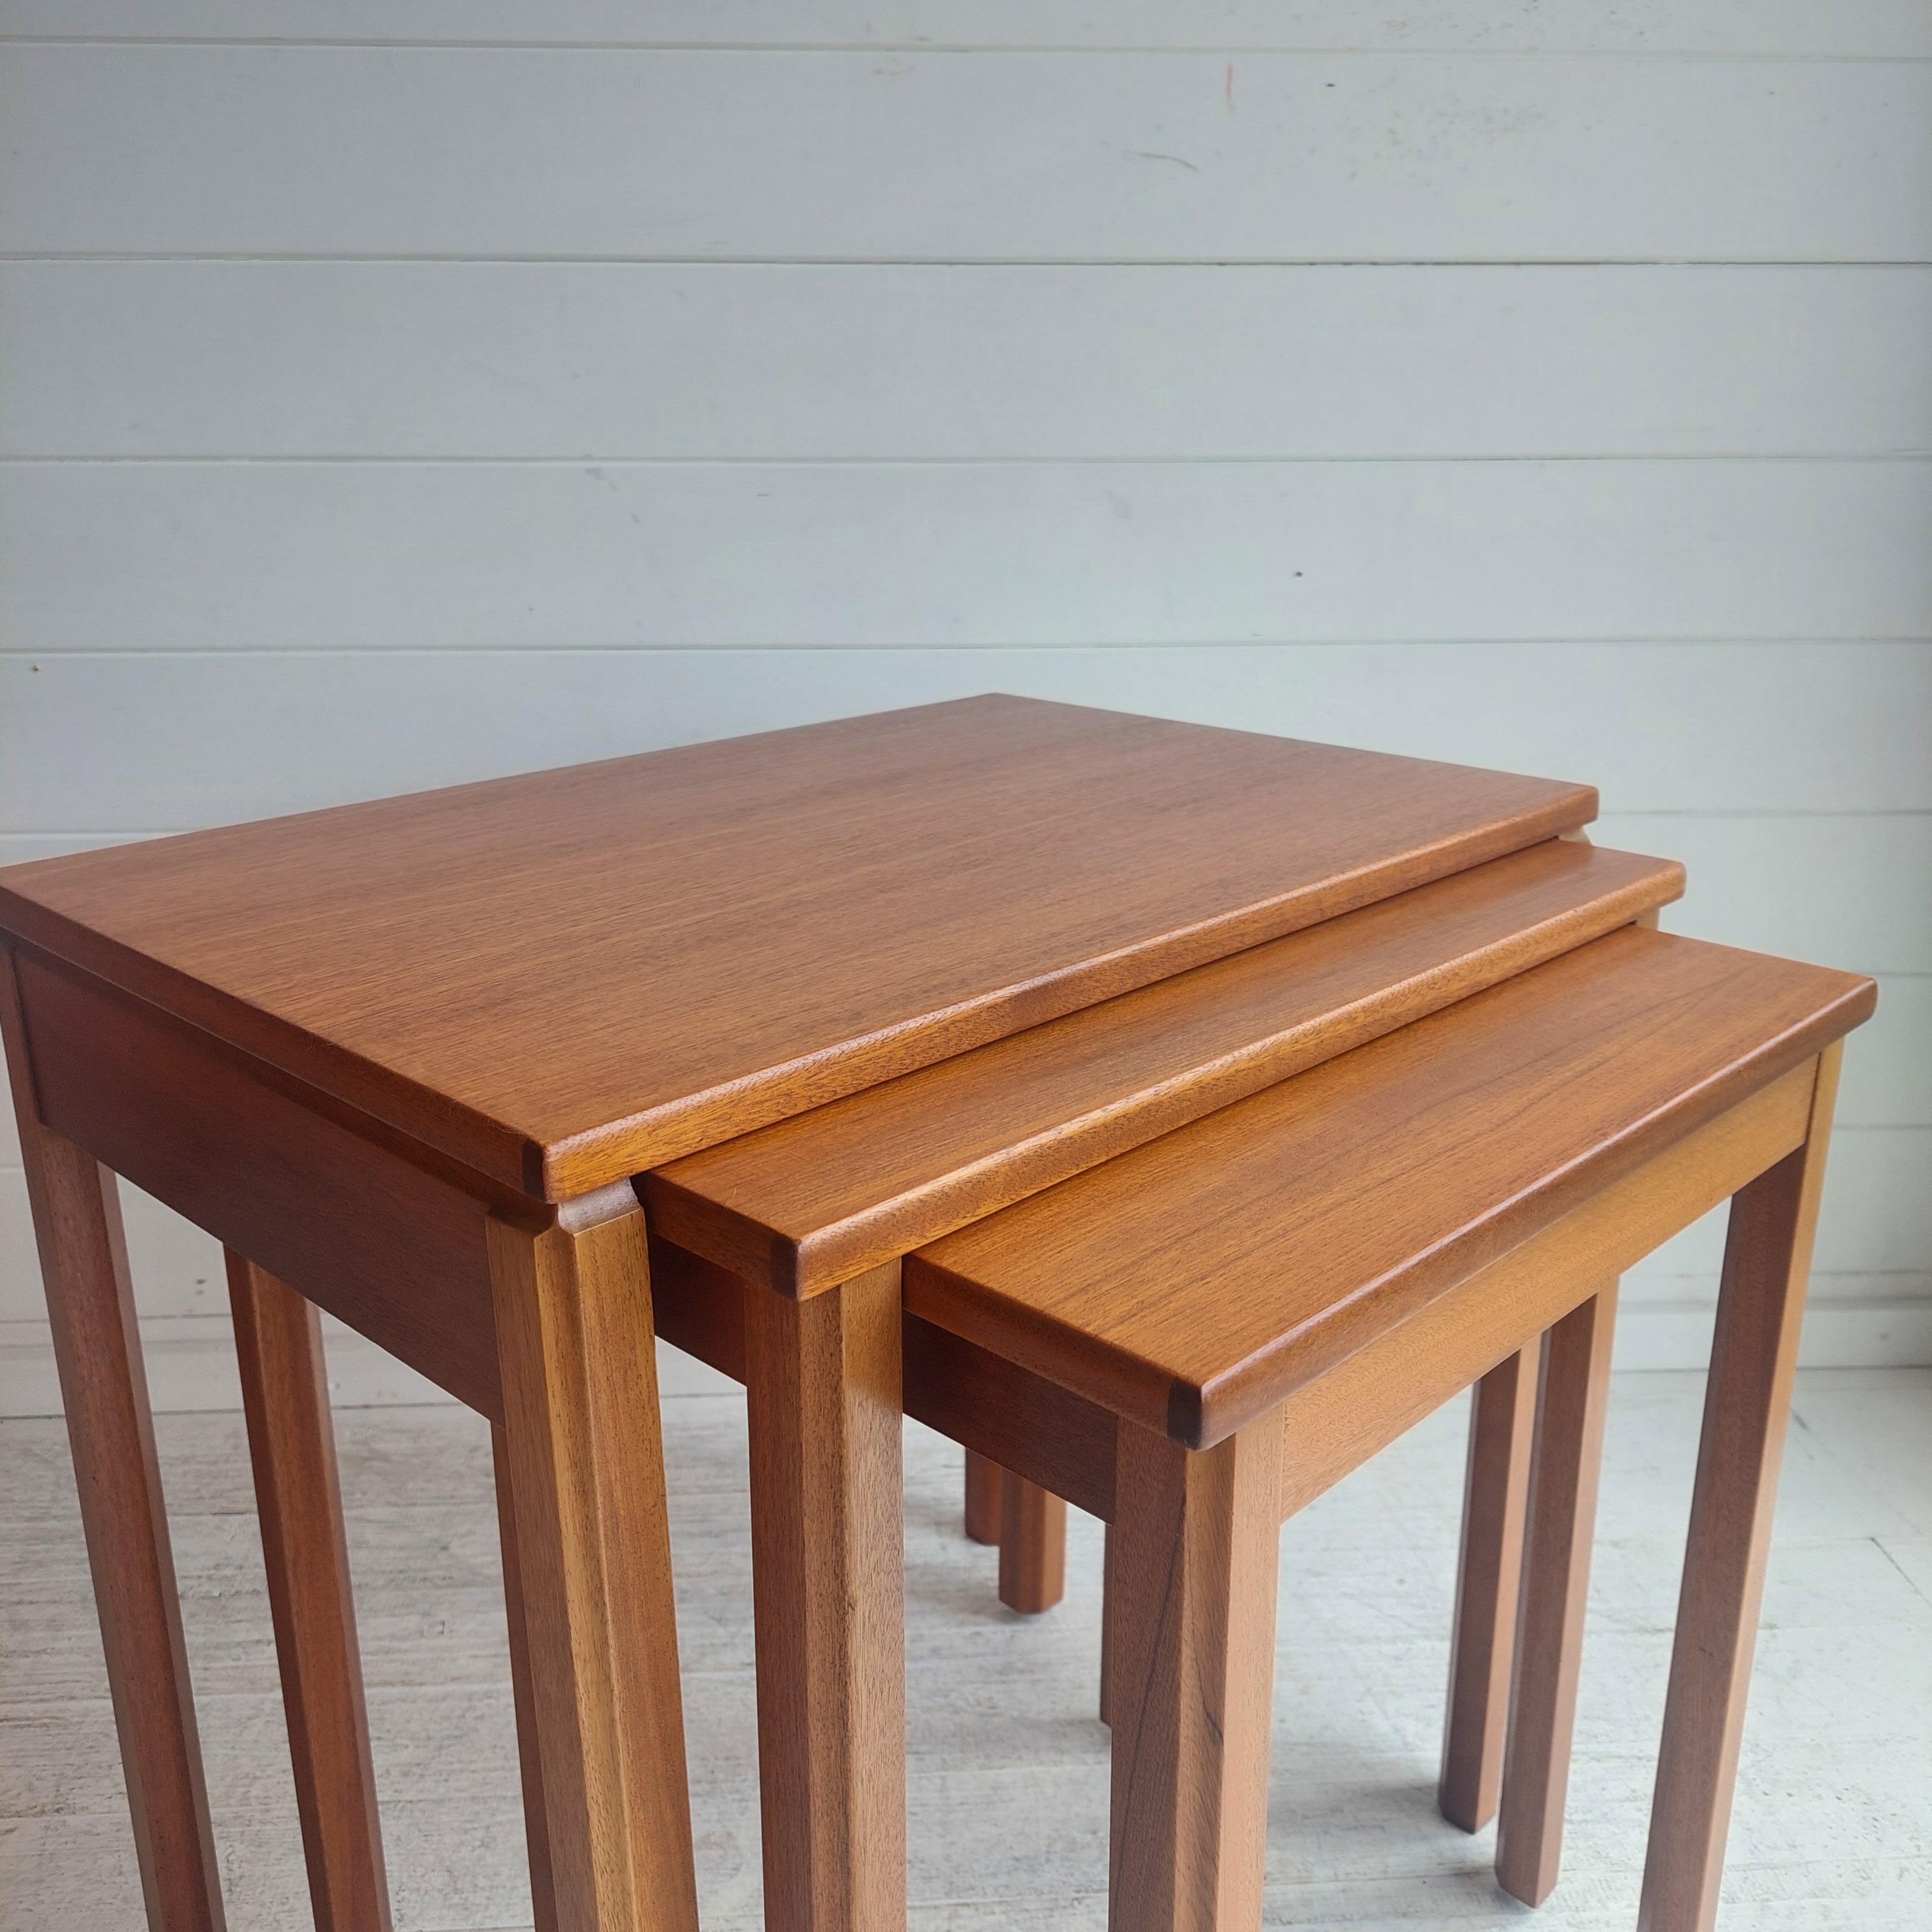 Nest of teak tables.
Made by A.H McIntosh & Co Ltd, Kirkcaldy Scotland, this retro 1970s.
They would be the perfect mid-century addition to your home. 
Inspired by Danish design, these tables have a beautiful, warm teak wood tone.

The three tables